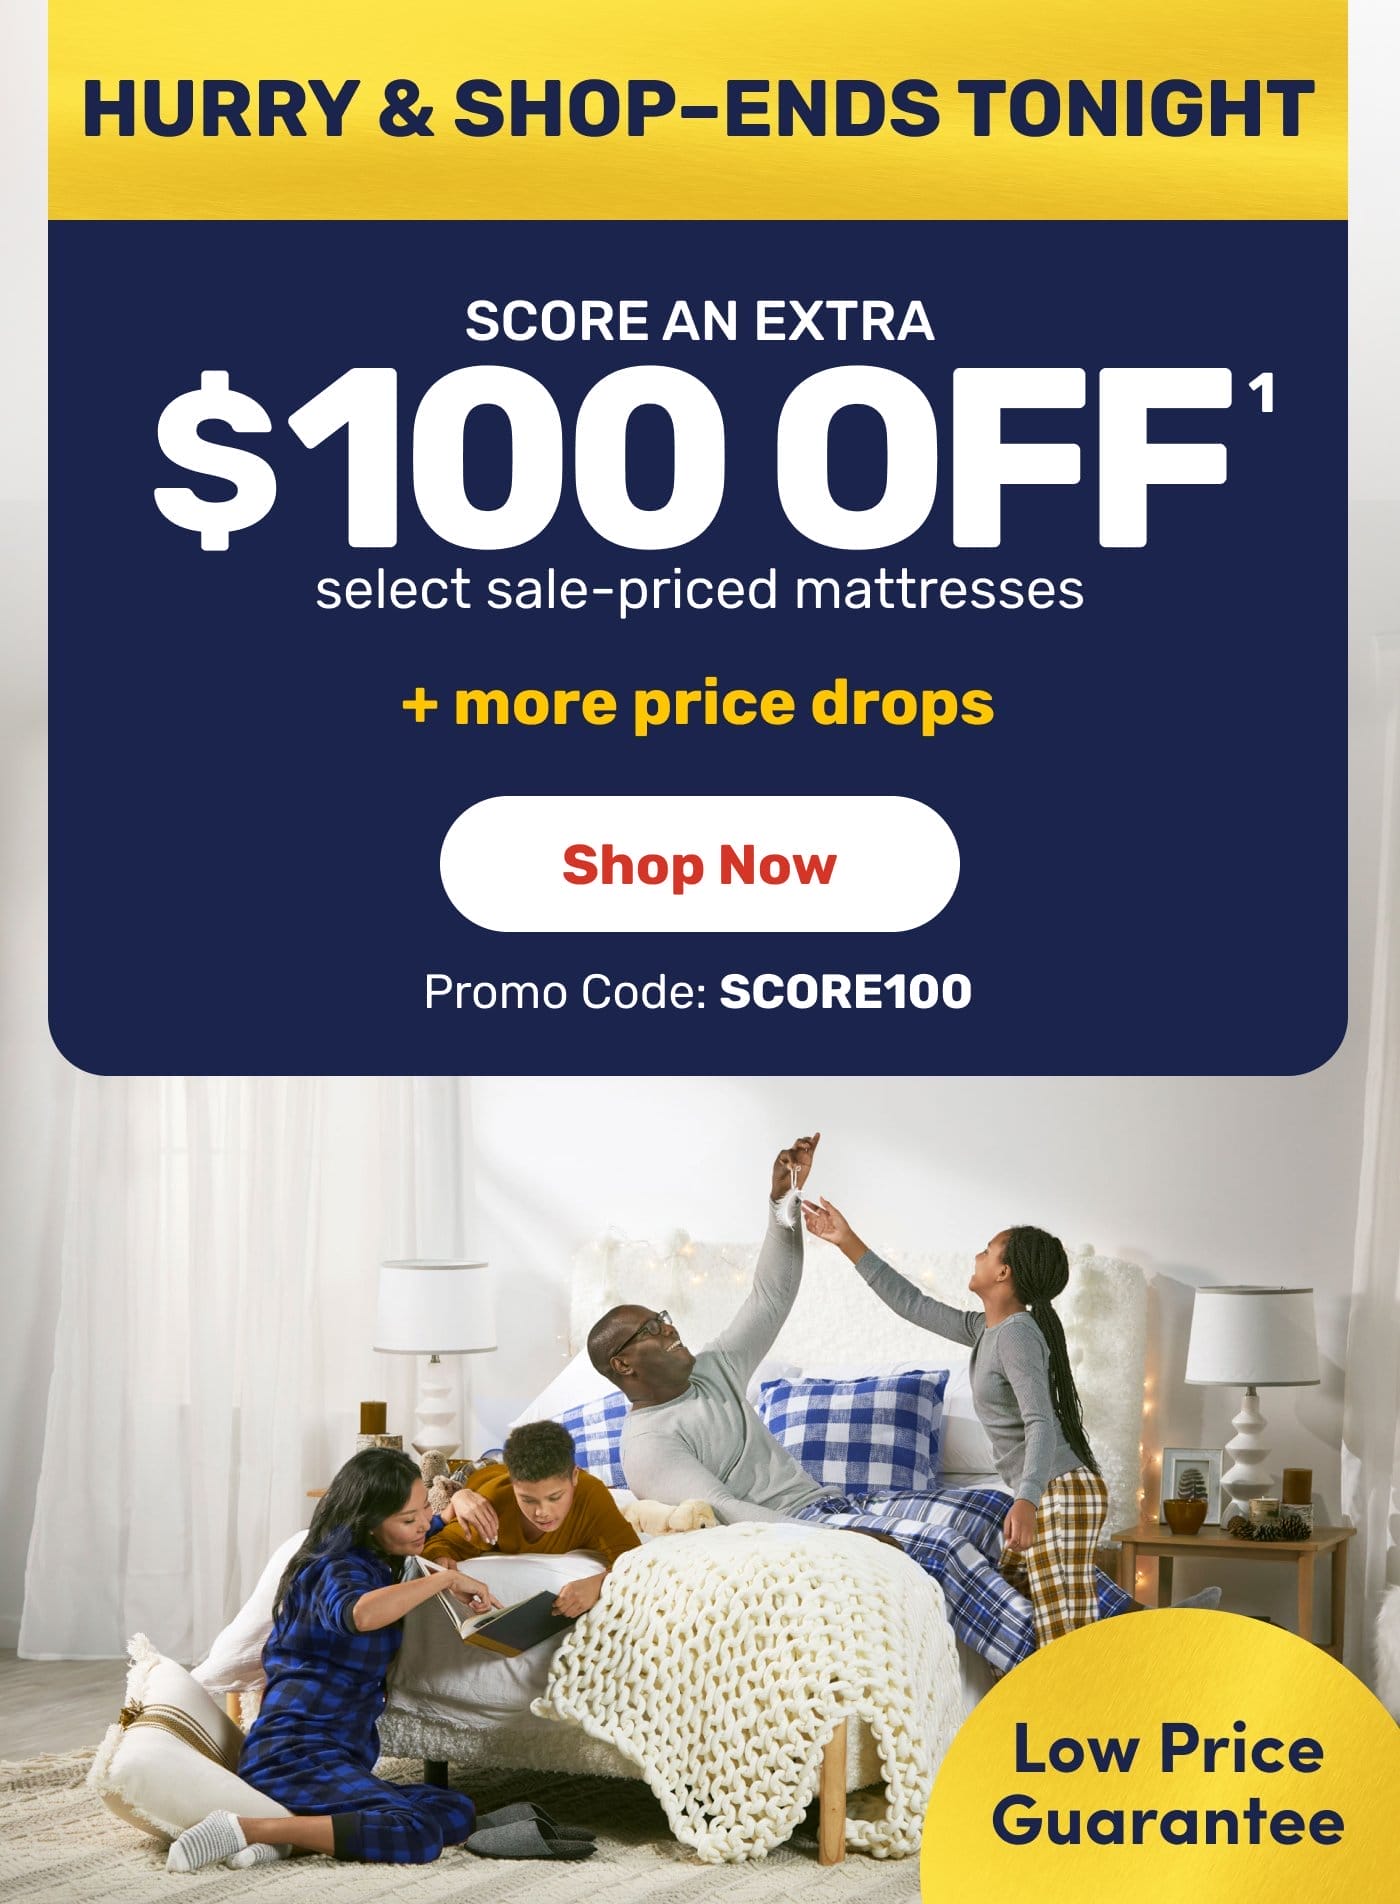 SCORE AN EXTRA \\$100 OFF